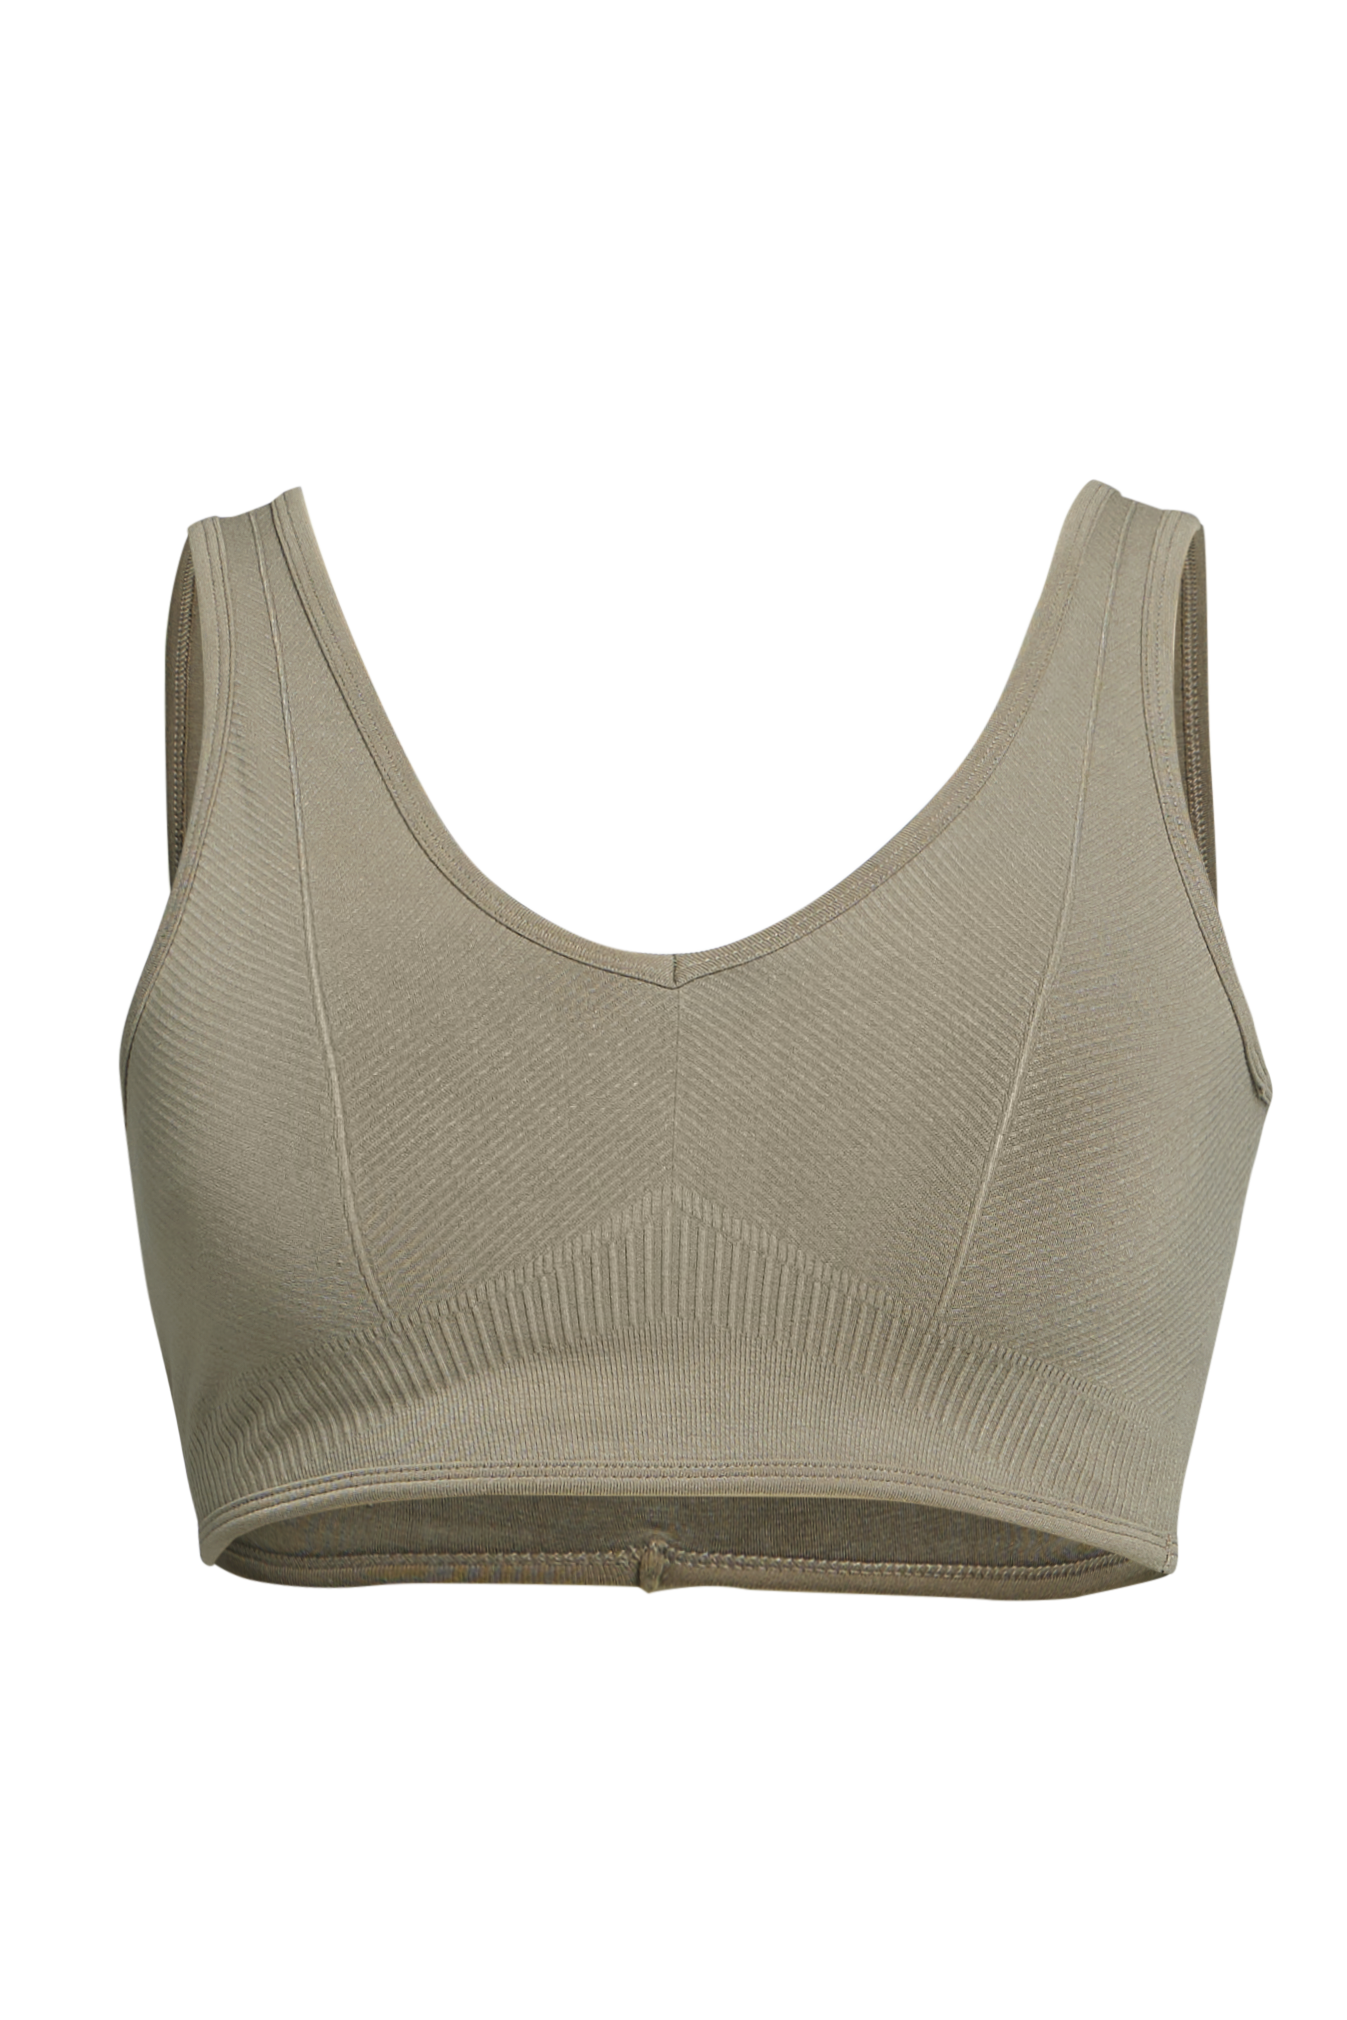 Rest Day Seamless Bralette in Earthy Brown - view 4